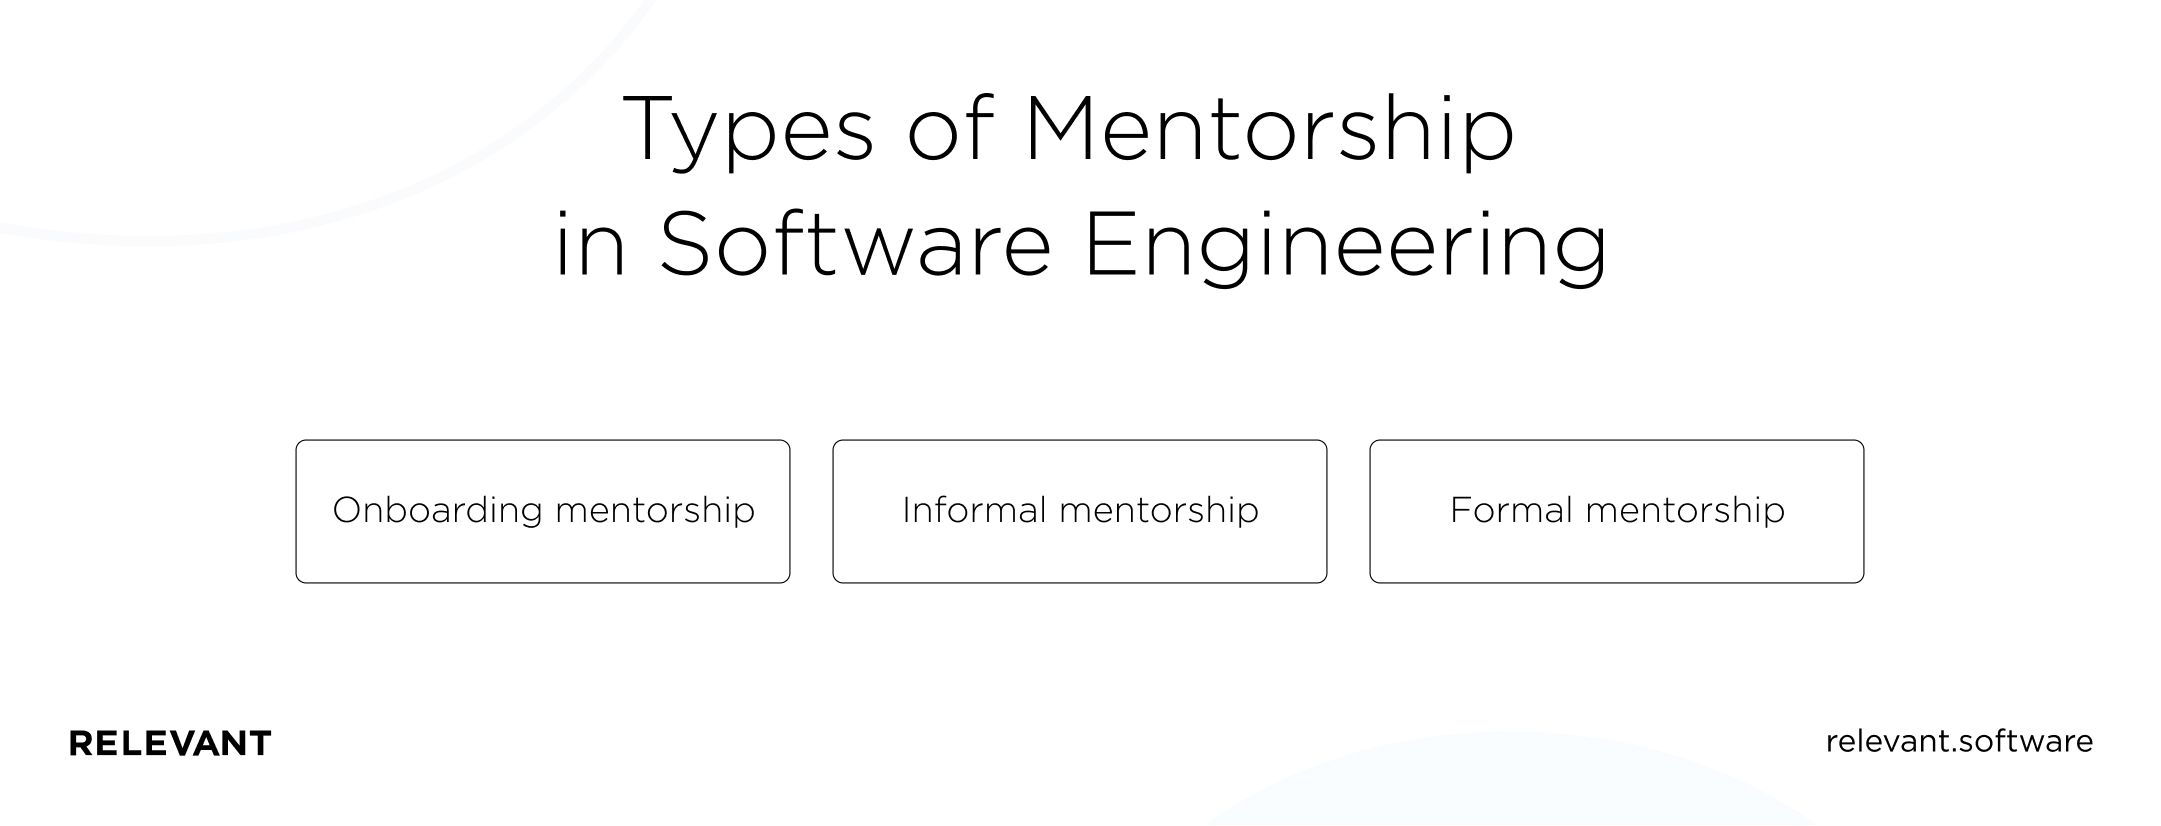 Types of Mentorship in Software Engineering